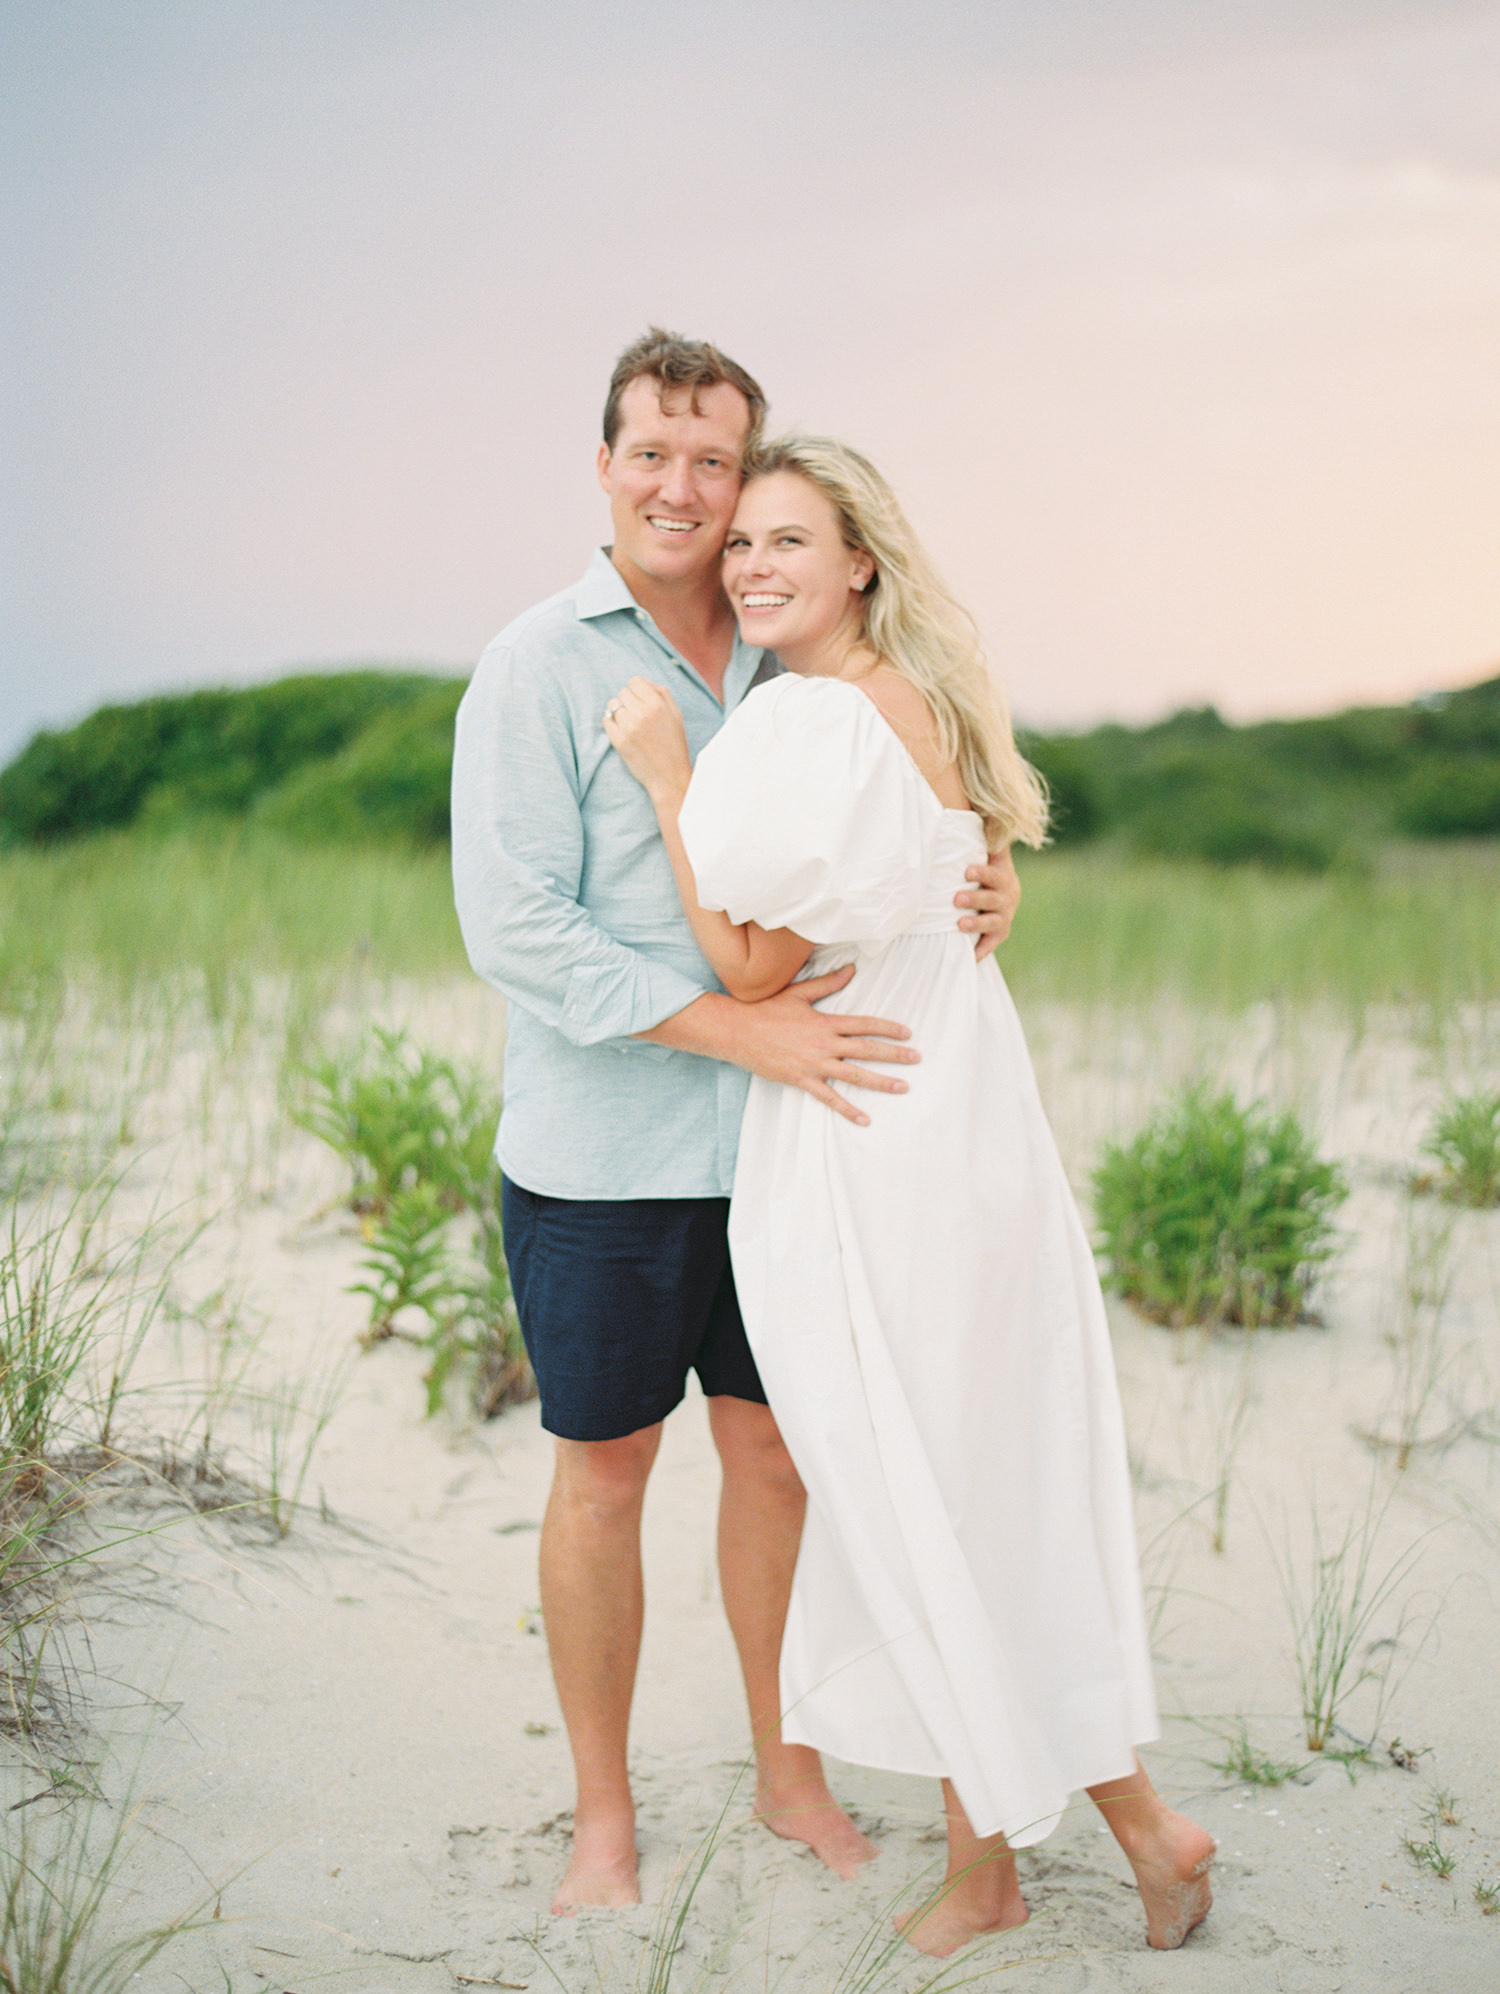 Cape May beach engagement photo by Mary Dougherty